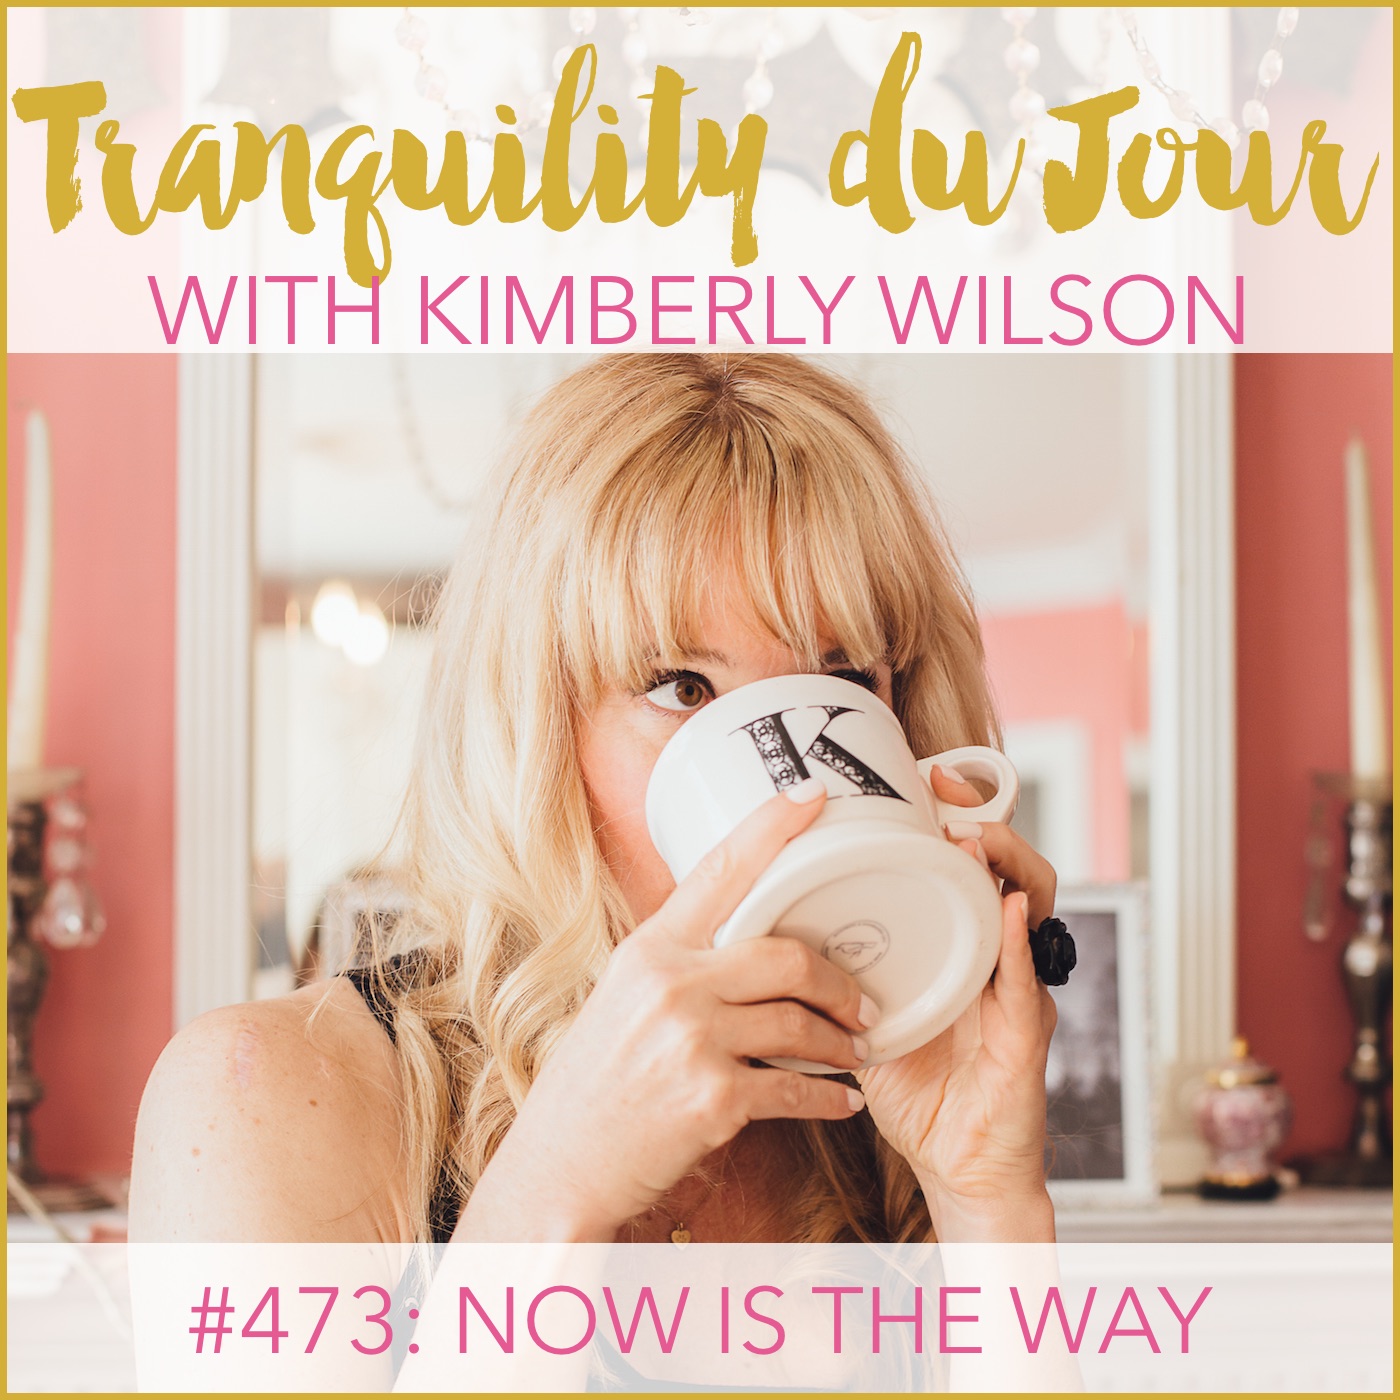 Tranquility du Jour #473: Now is the Way